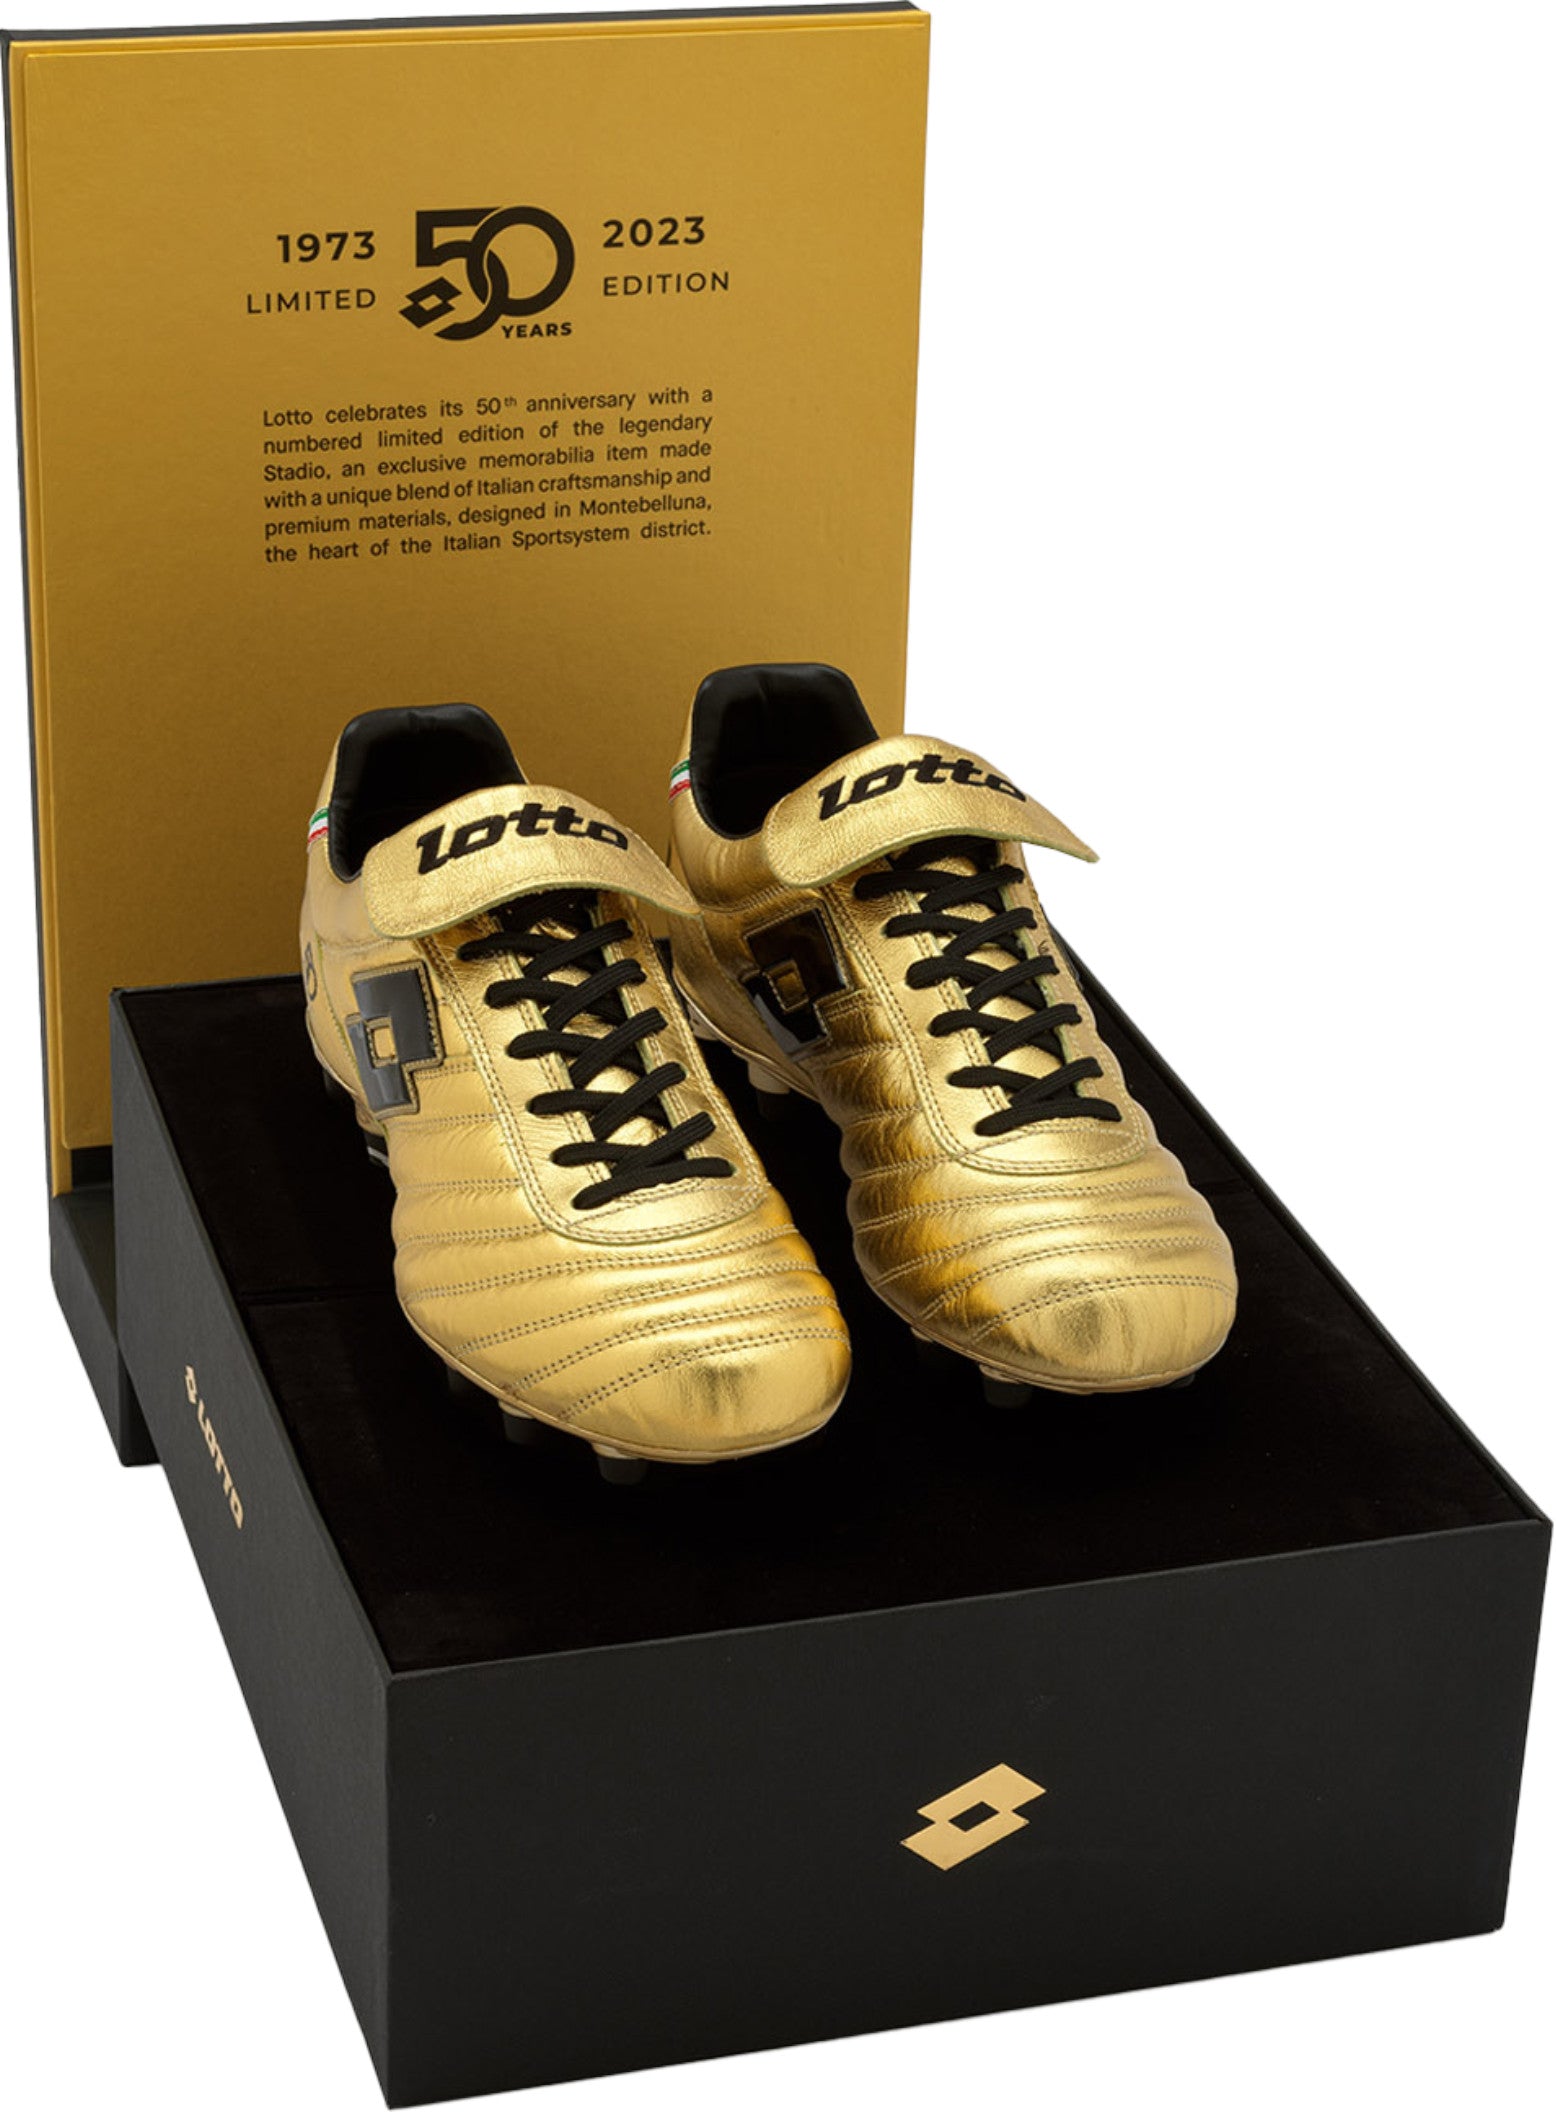 Lotto Celebrates 50th Anniversary With Limited-Edition Boot Drop